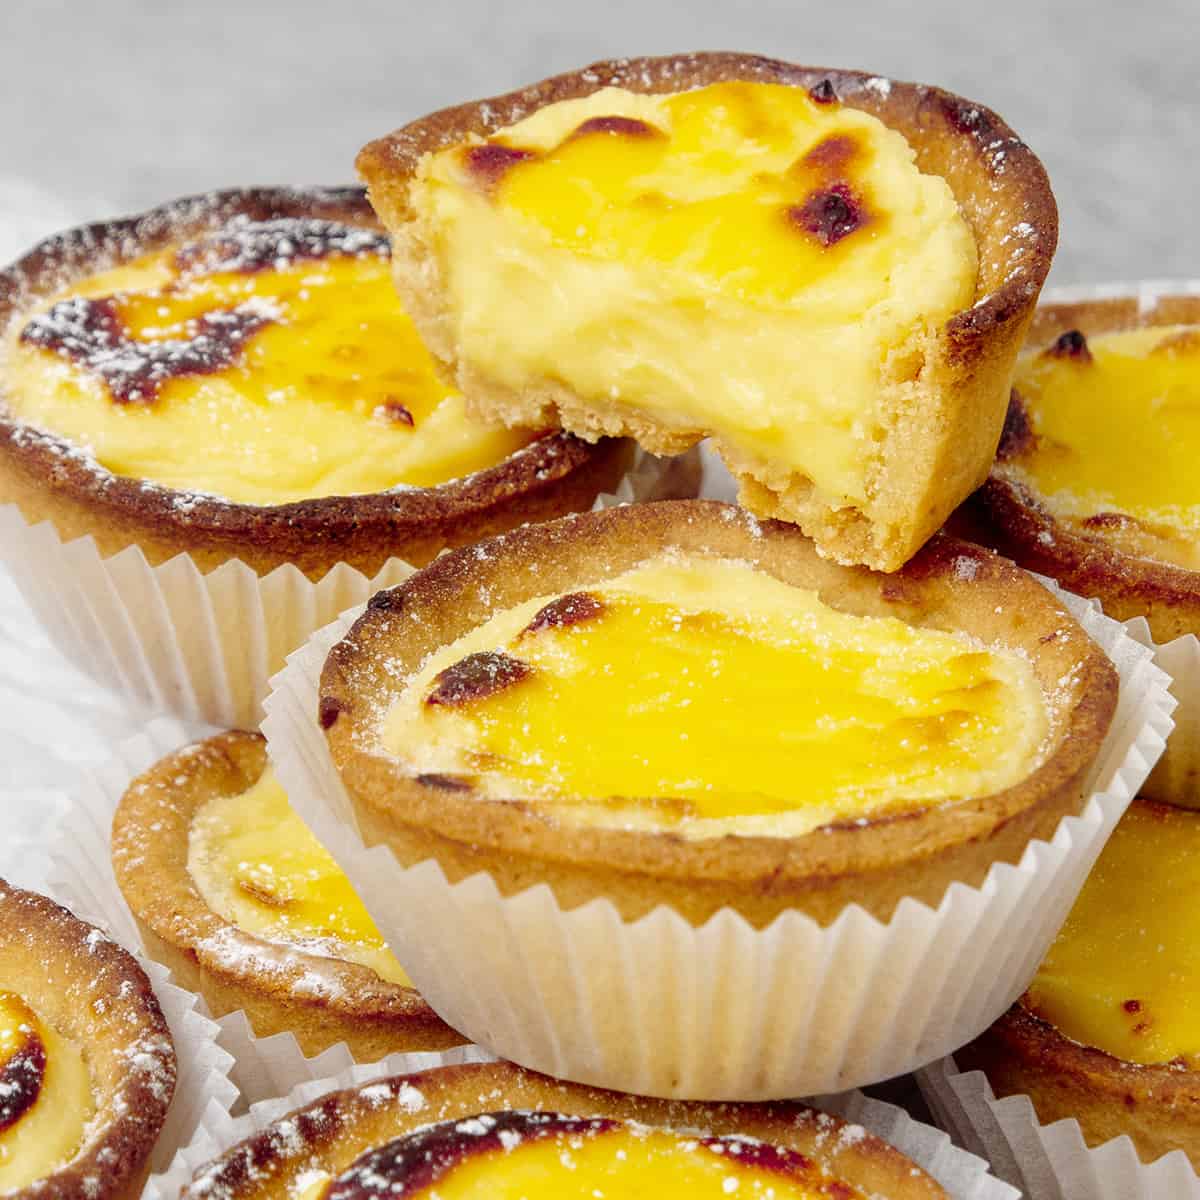 <p><a href="https://www.spatuladesserts.com/hokkaido-baked-cheese-tarts/">Hokkaido Baked Cheese Tarts</a> are the ultimate rich and creamy Japanese desserts with crunchy shortcrust tart base and distinct sweet and savory cheesy filling. Sweet shortcrust pastry filled with a combination of creamy, sweet, and savory dairy and cheese products such as heavy cream, Philadephia cream cheese, and parmesan cheese. A must-try!</p> <p><strong>Recipe: <a href="https://www.spatuladesserts.com/hokkaido-baked-cheese-tarts/">Hokkaido Baked Cheese Tarts</a></strong></p>